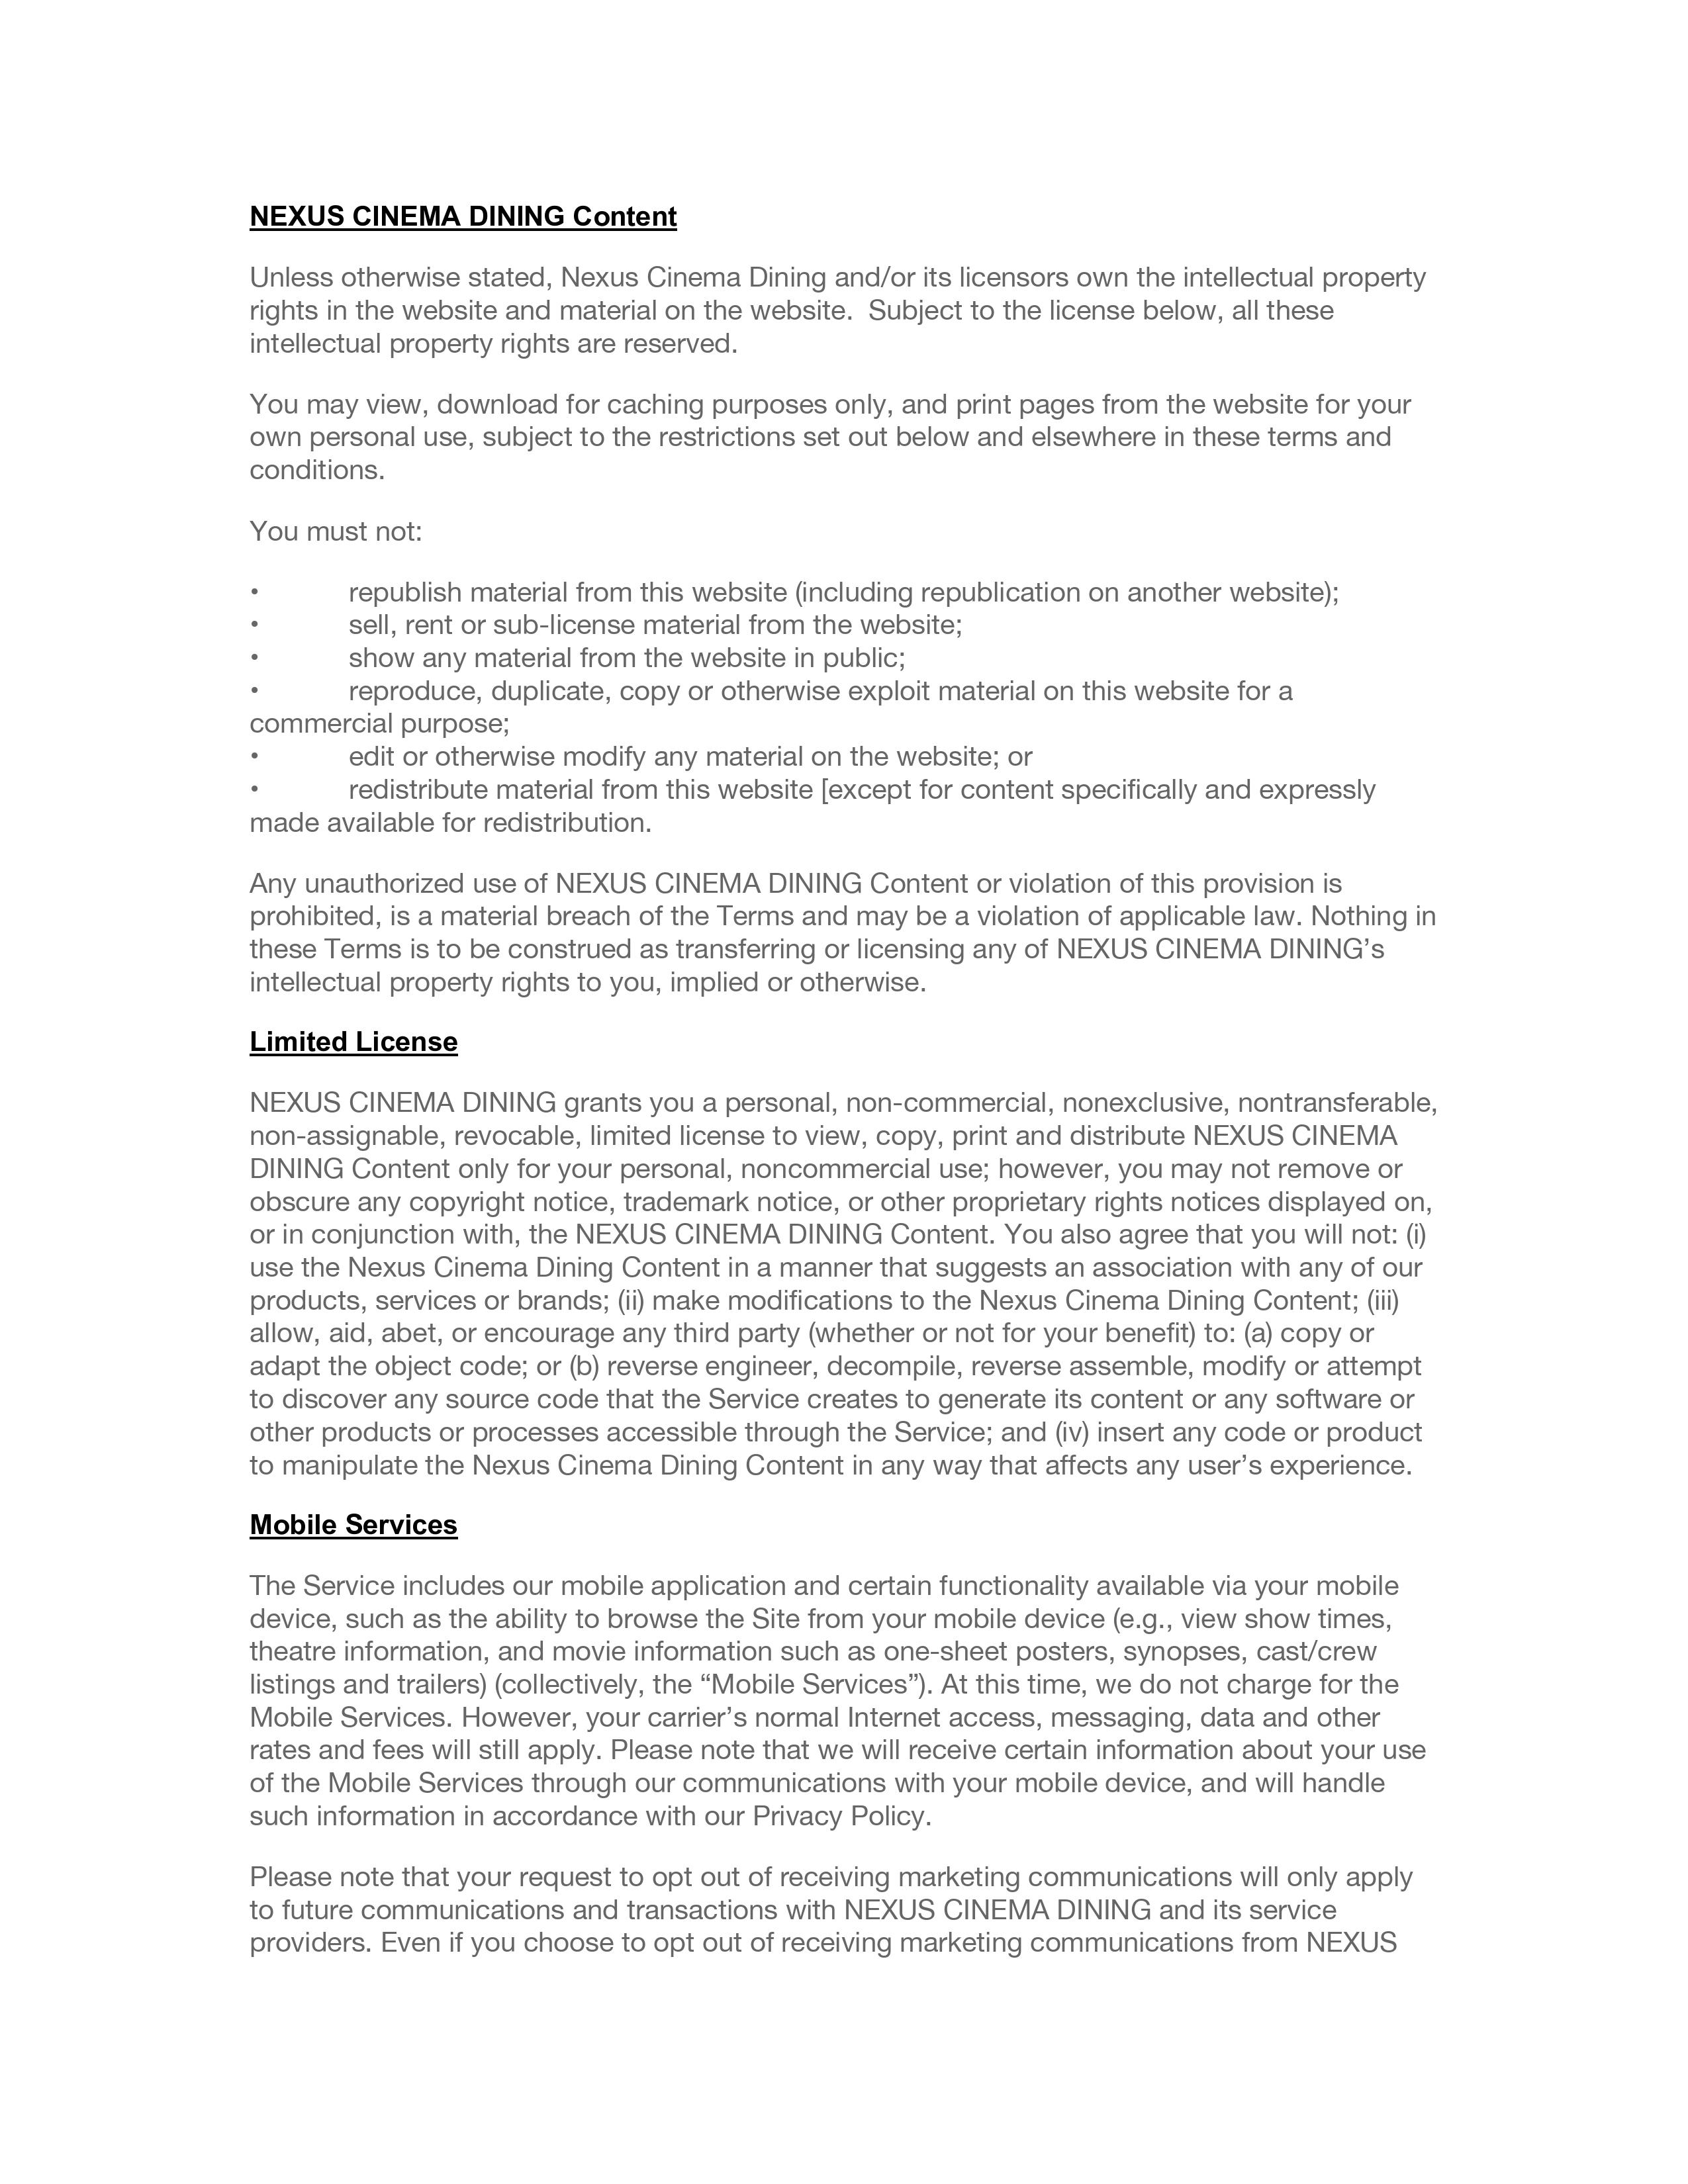 Nexus Cinema Dining Terms and Conditions 2